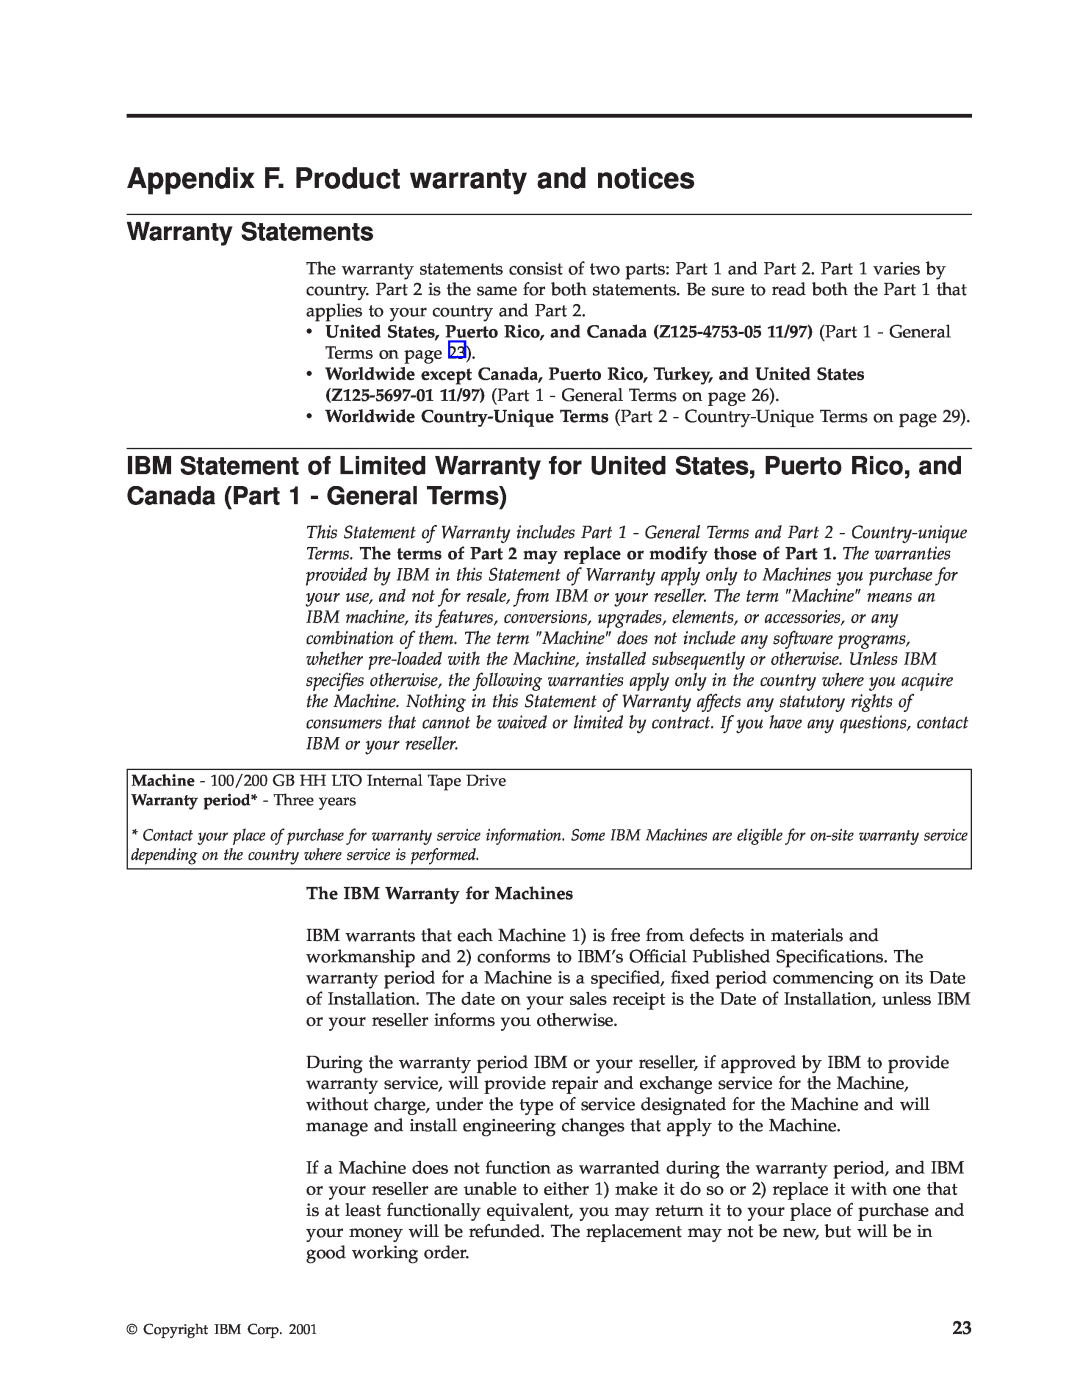 IBM HH LTO manual Appendix F. Product warranty and notices, Warranty Statements, The IBM Warranty for Machines 